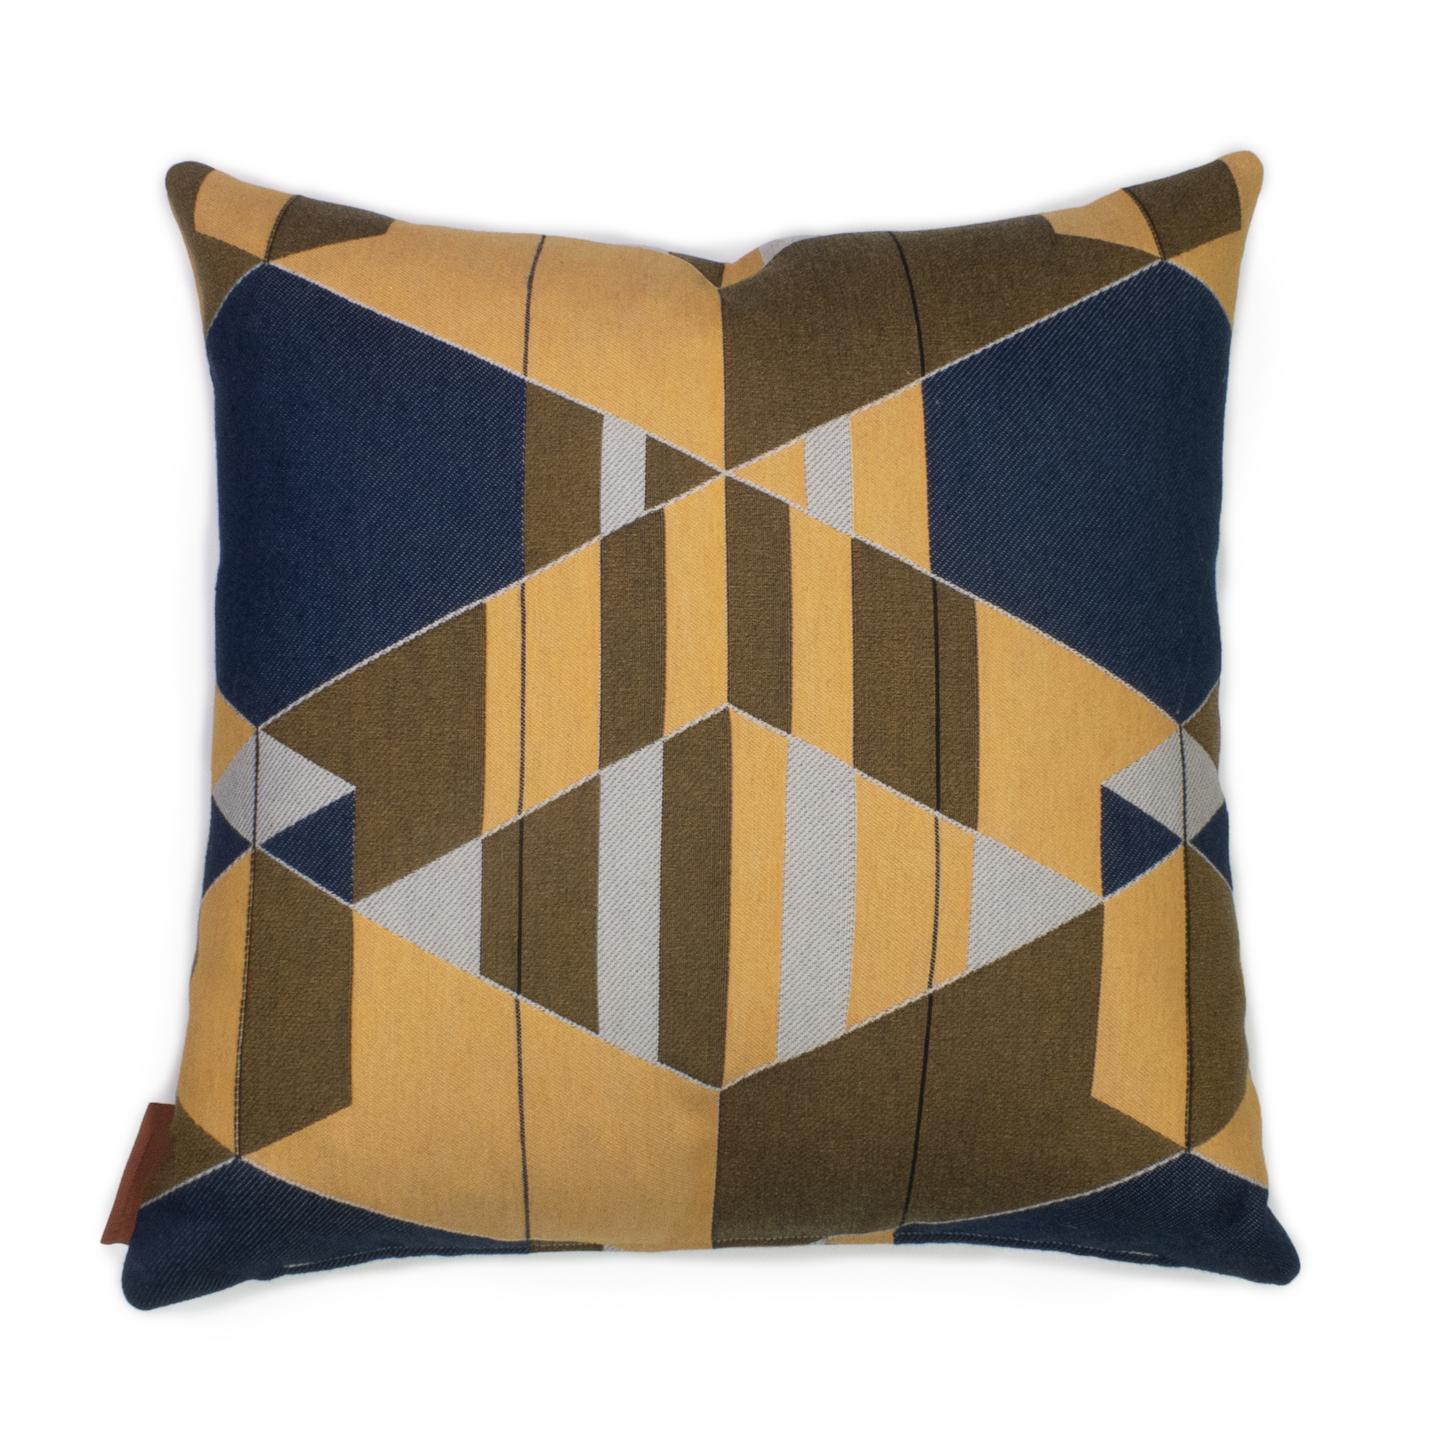 Modern Cushion / Pattern Pillow Absolute Coup De Foudre Blue Yellow by Evolution21 For Sale